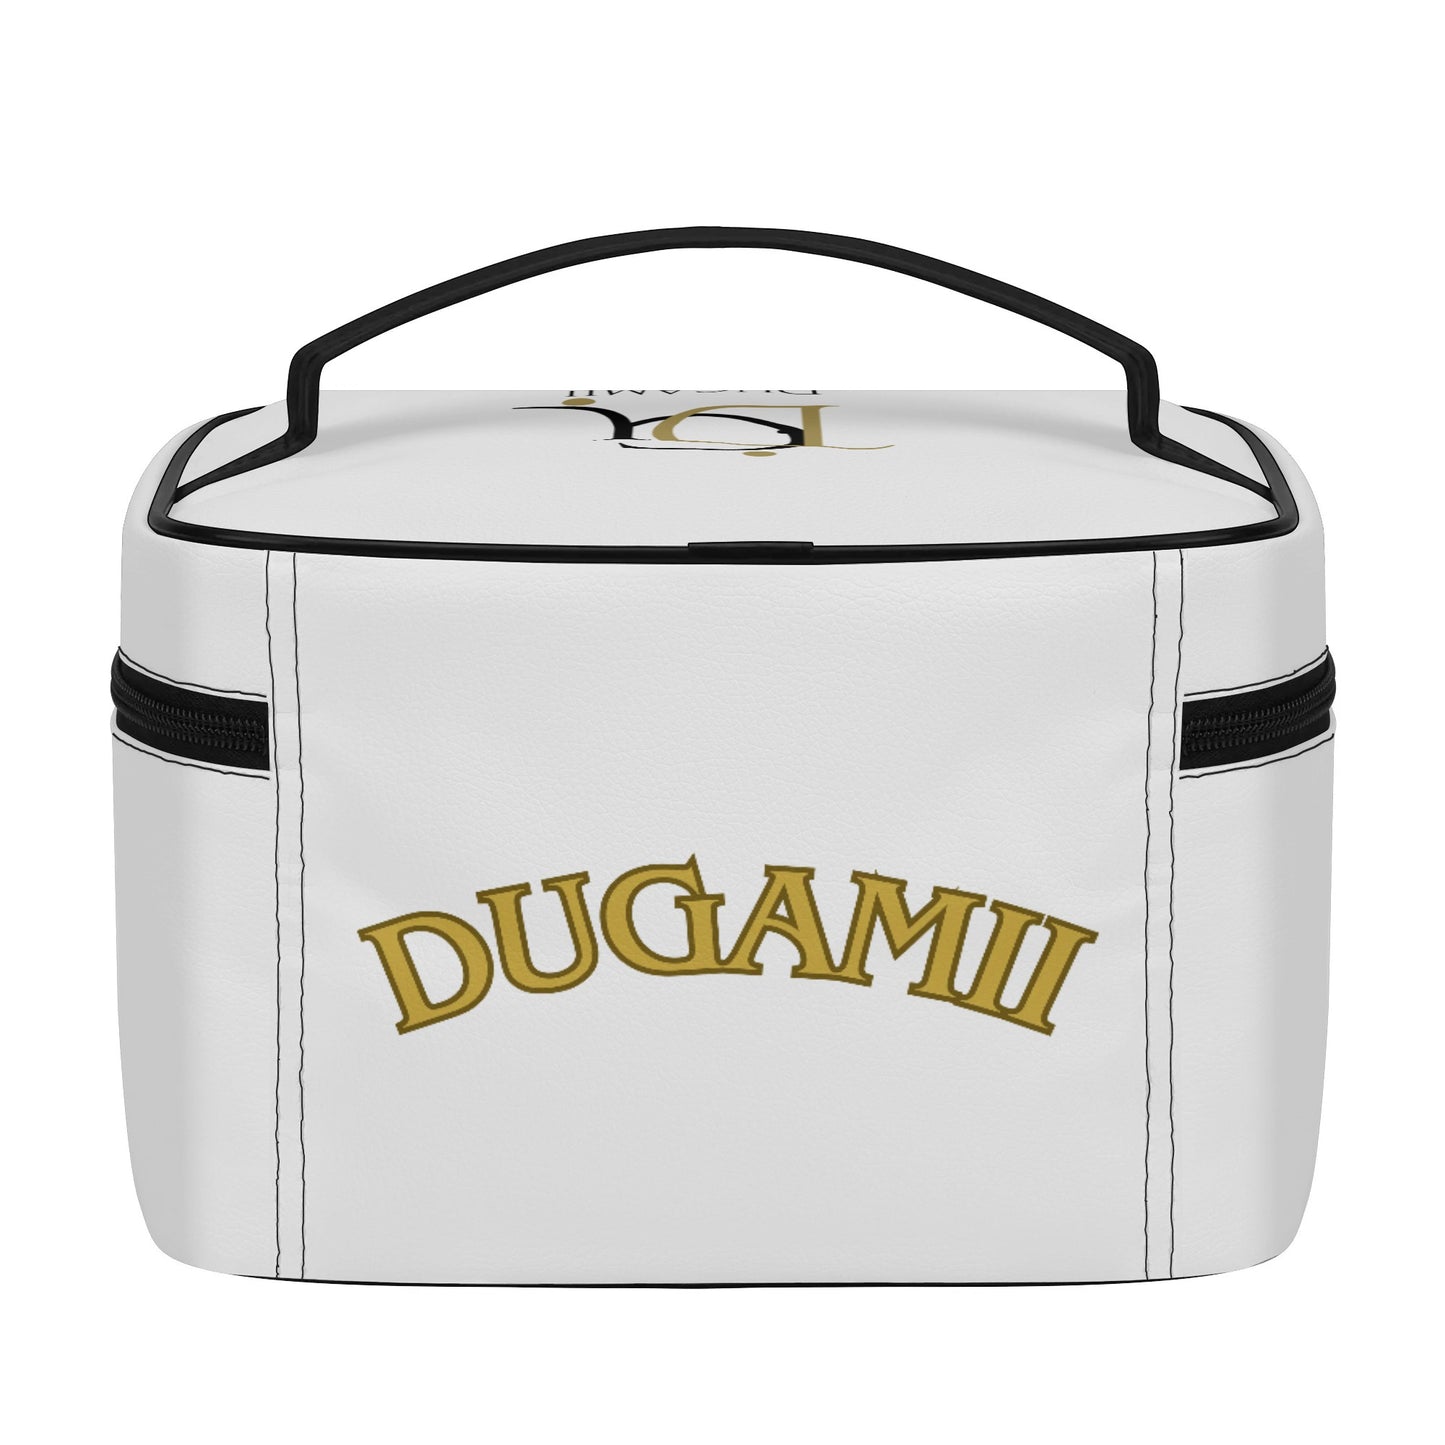 DuGamii Black and White Leather Cosmetic Bag